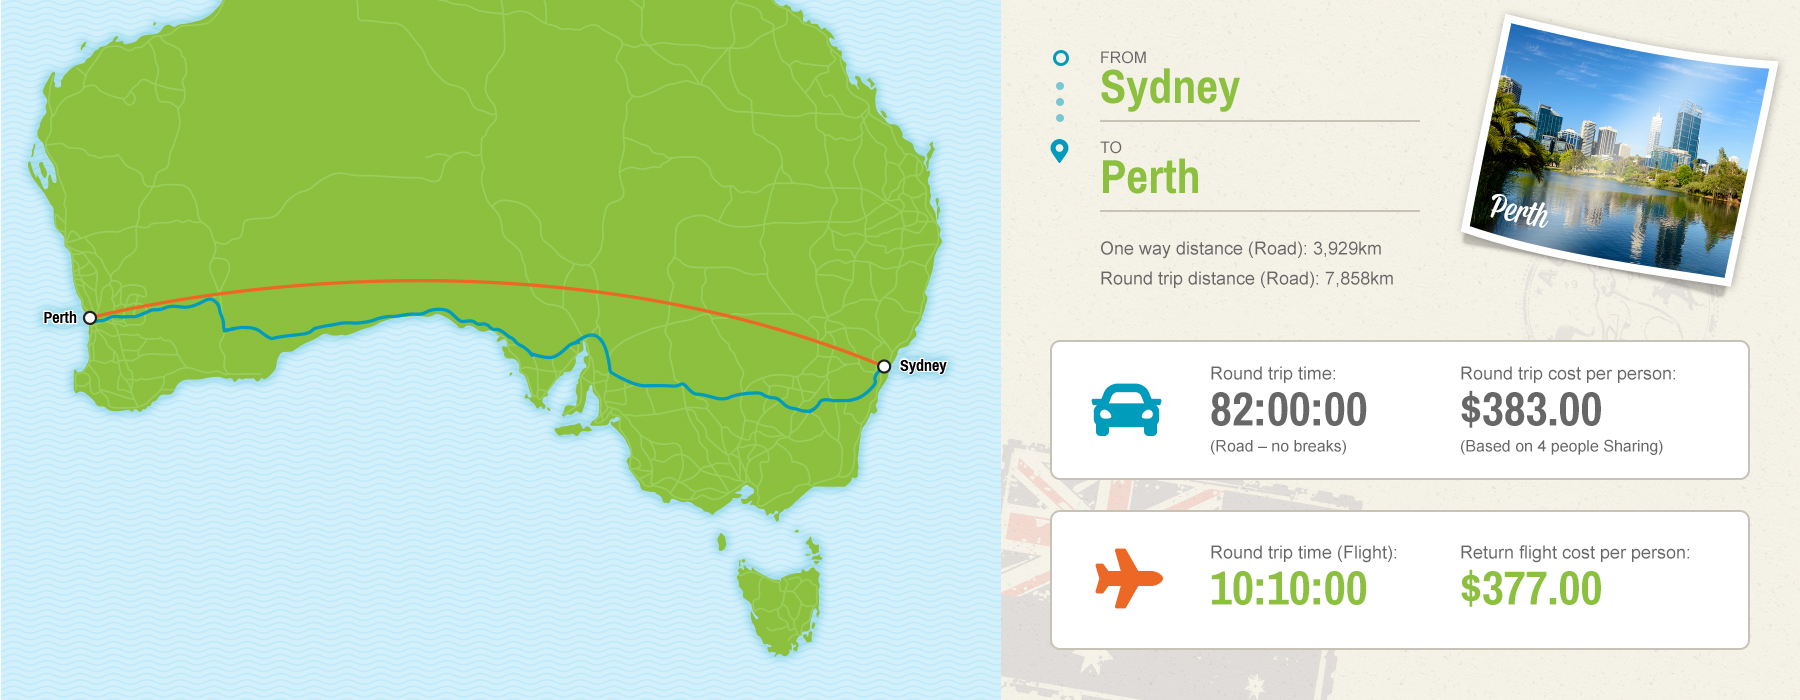 Sydney to Perth map showing driving vs flying